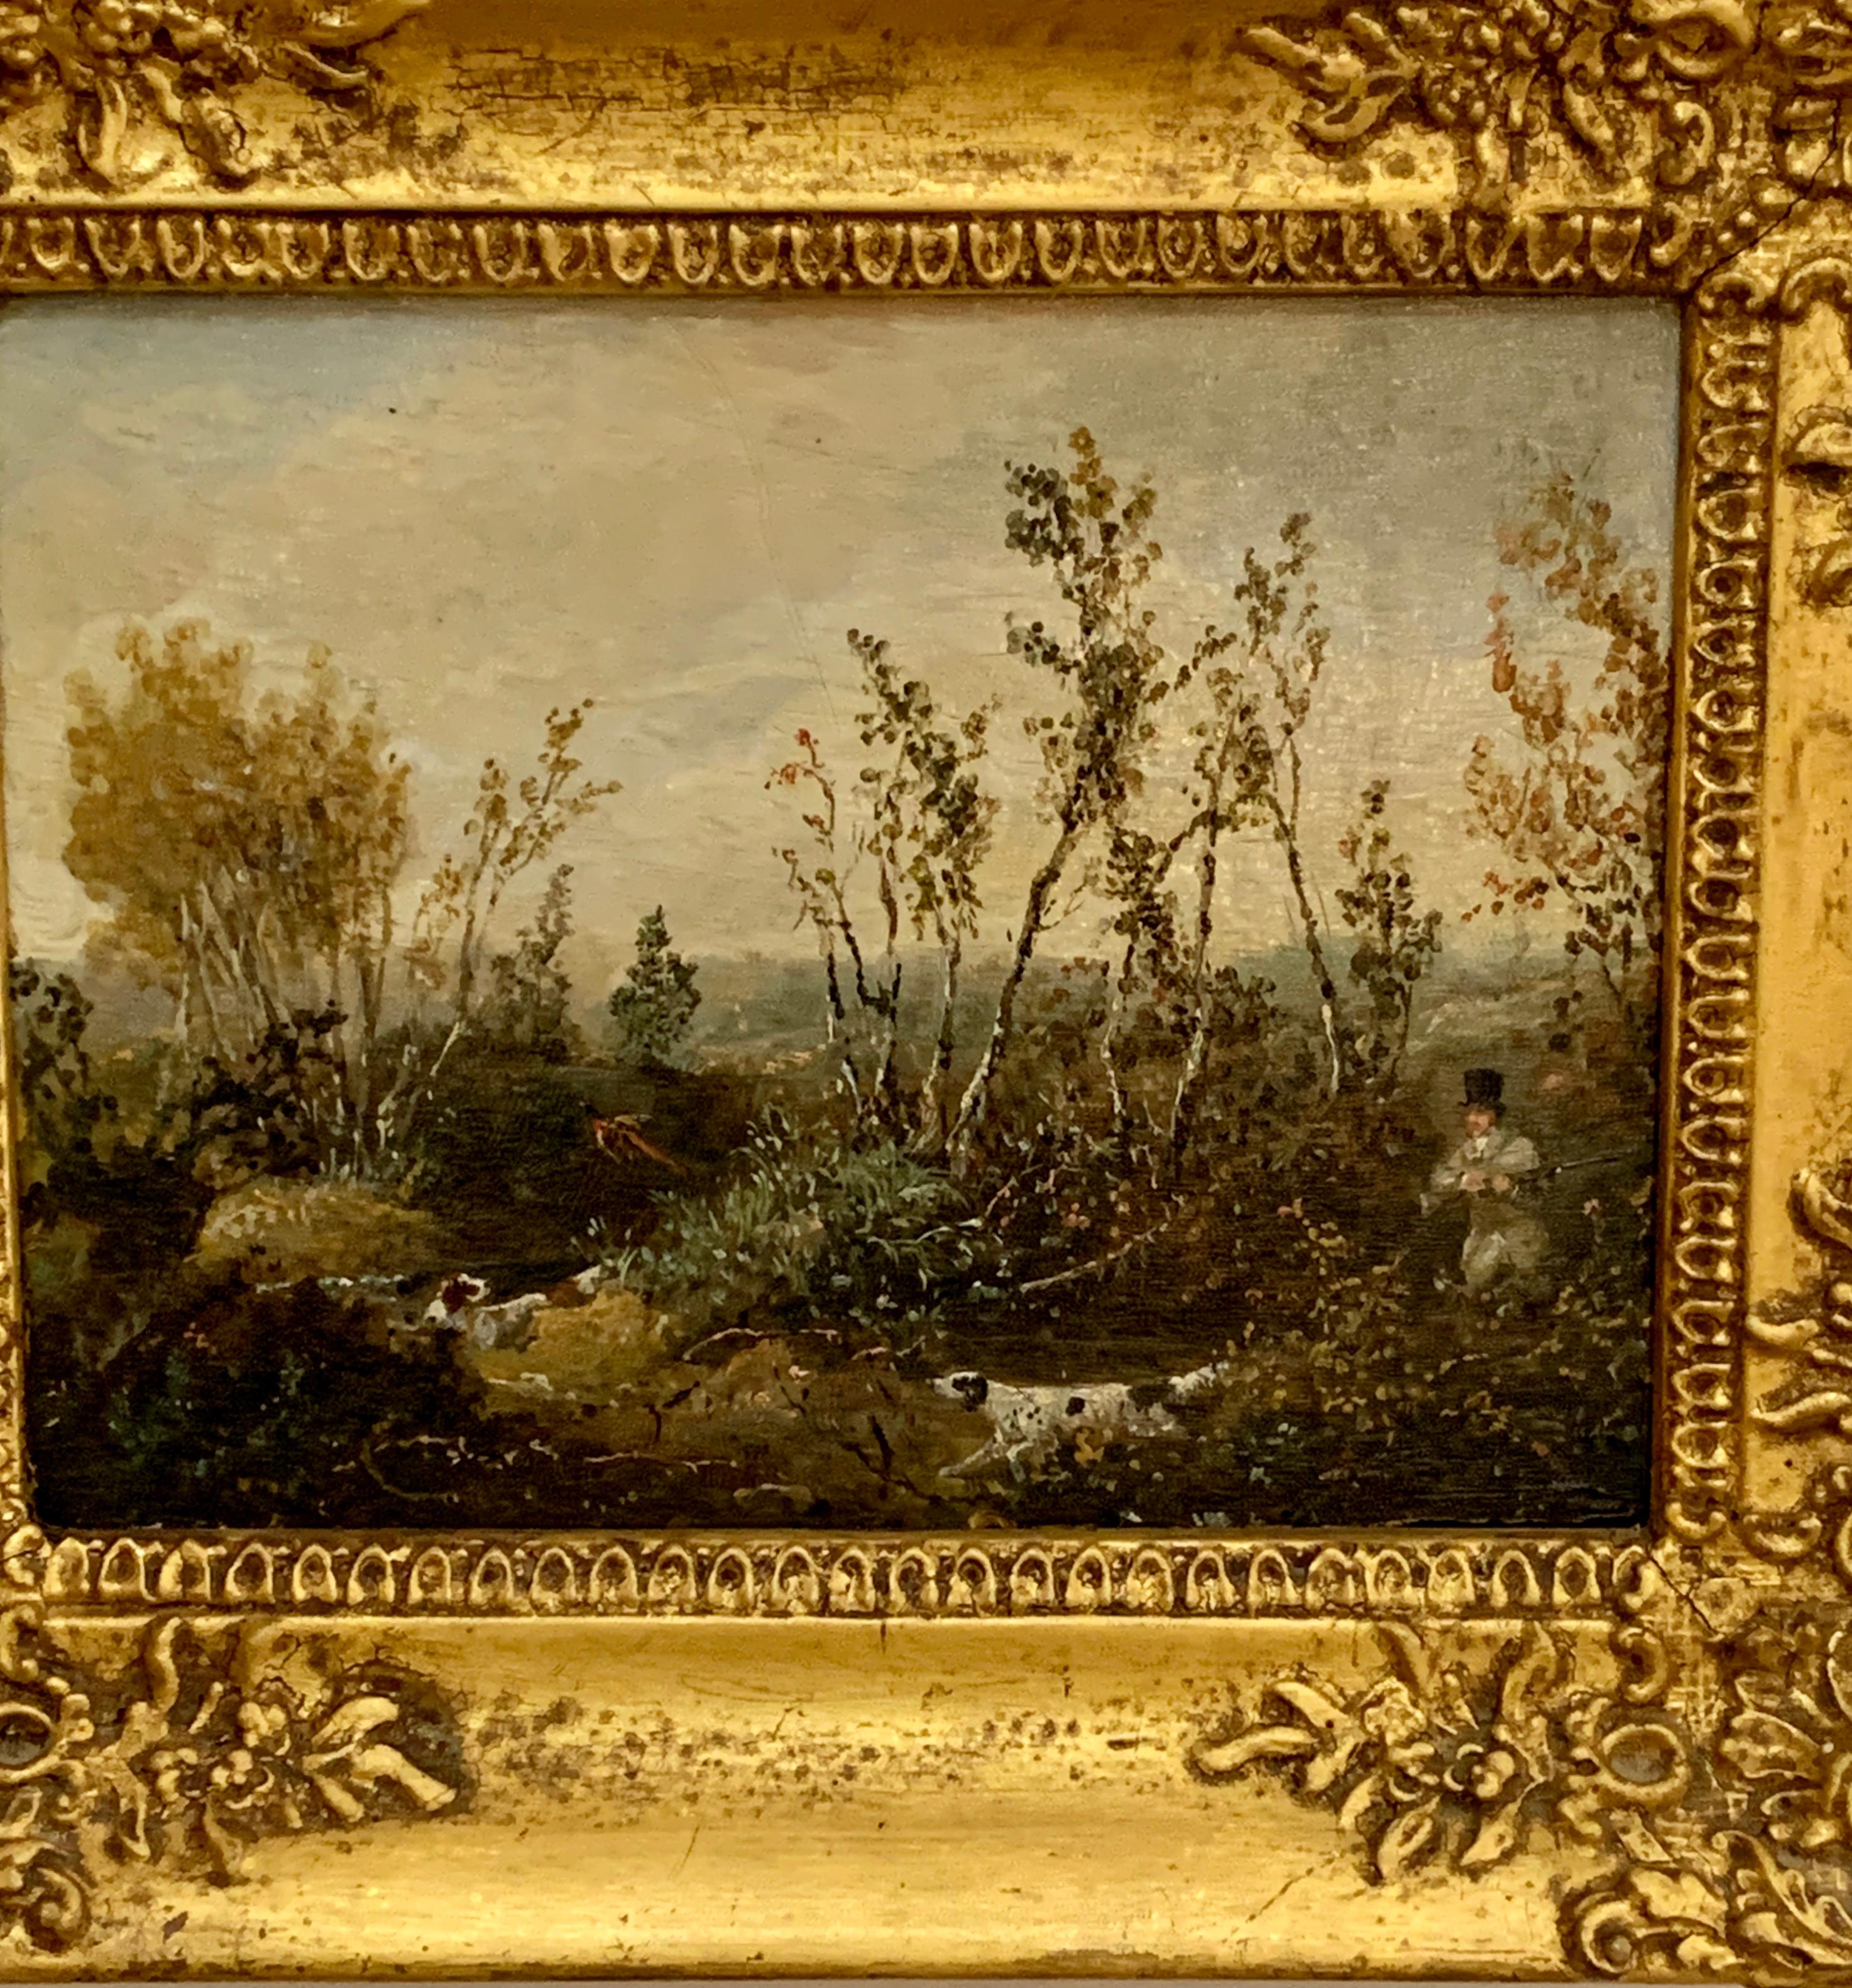 Amazing set of 4 Shooting scenes from the early part of the 19th century. Samuel J. E. Jones painted principally hunting, shooting and fishing scenes, and appeared to paint them mainly between 1820-49, some other subject matters were also tackled